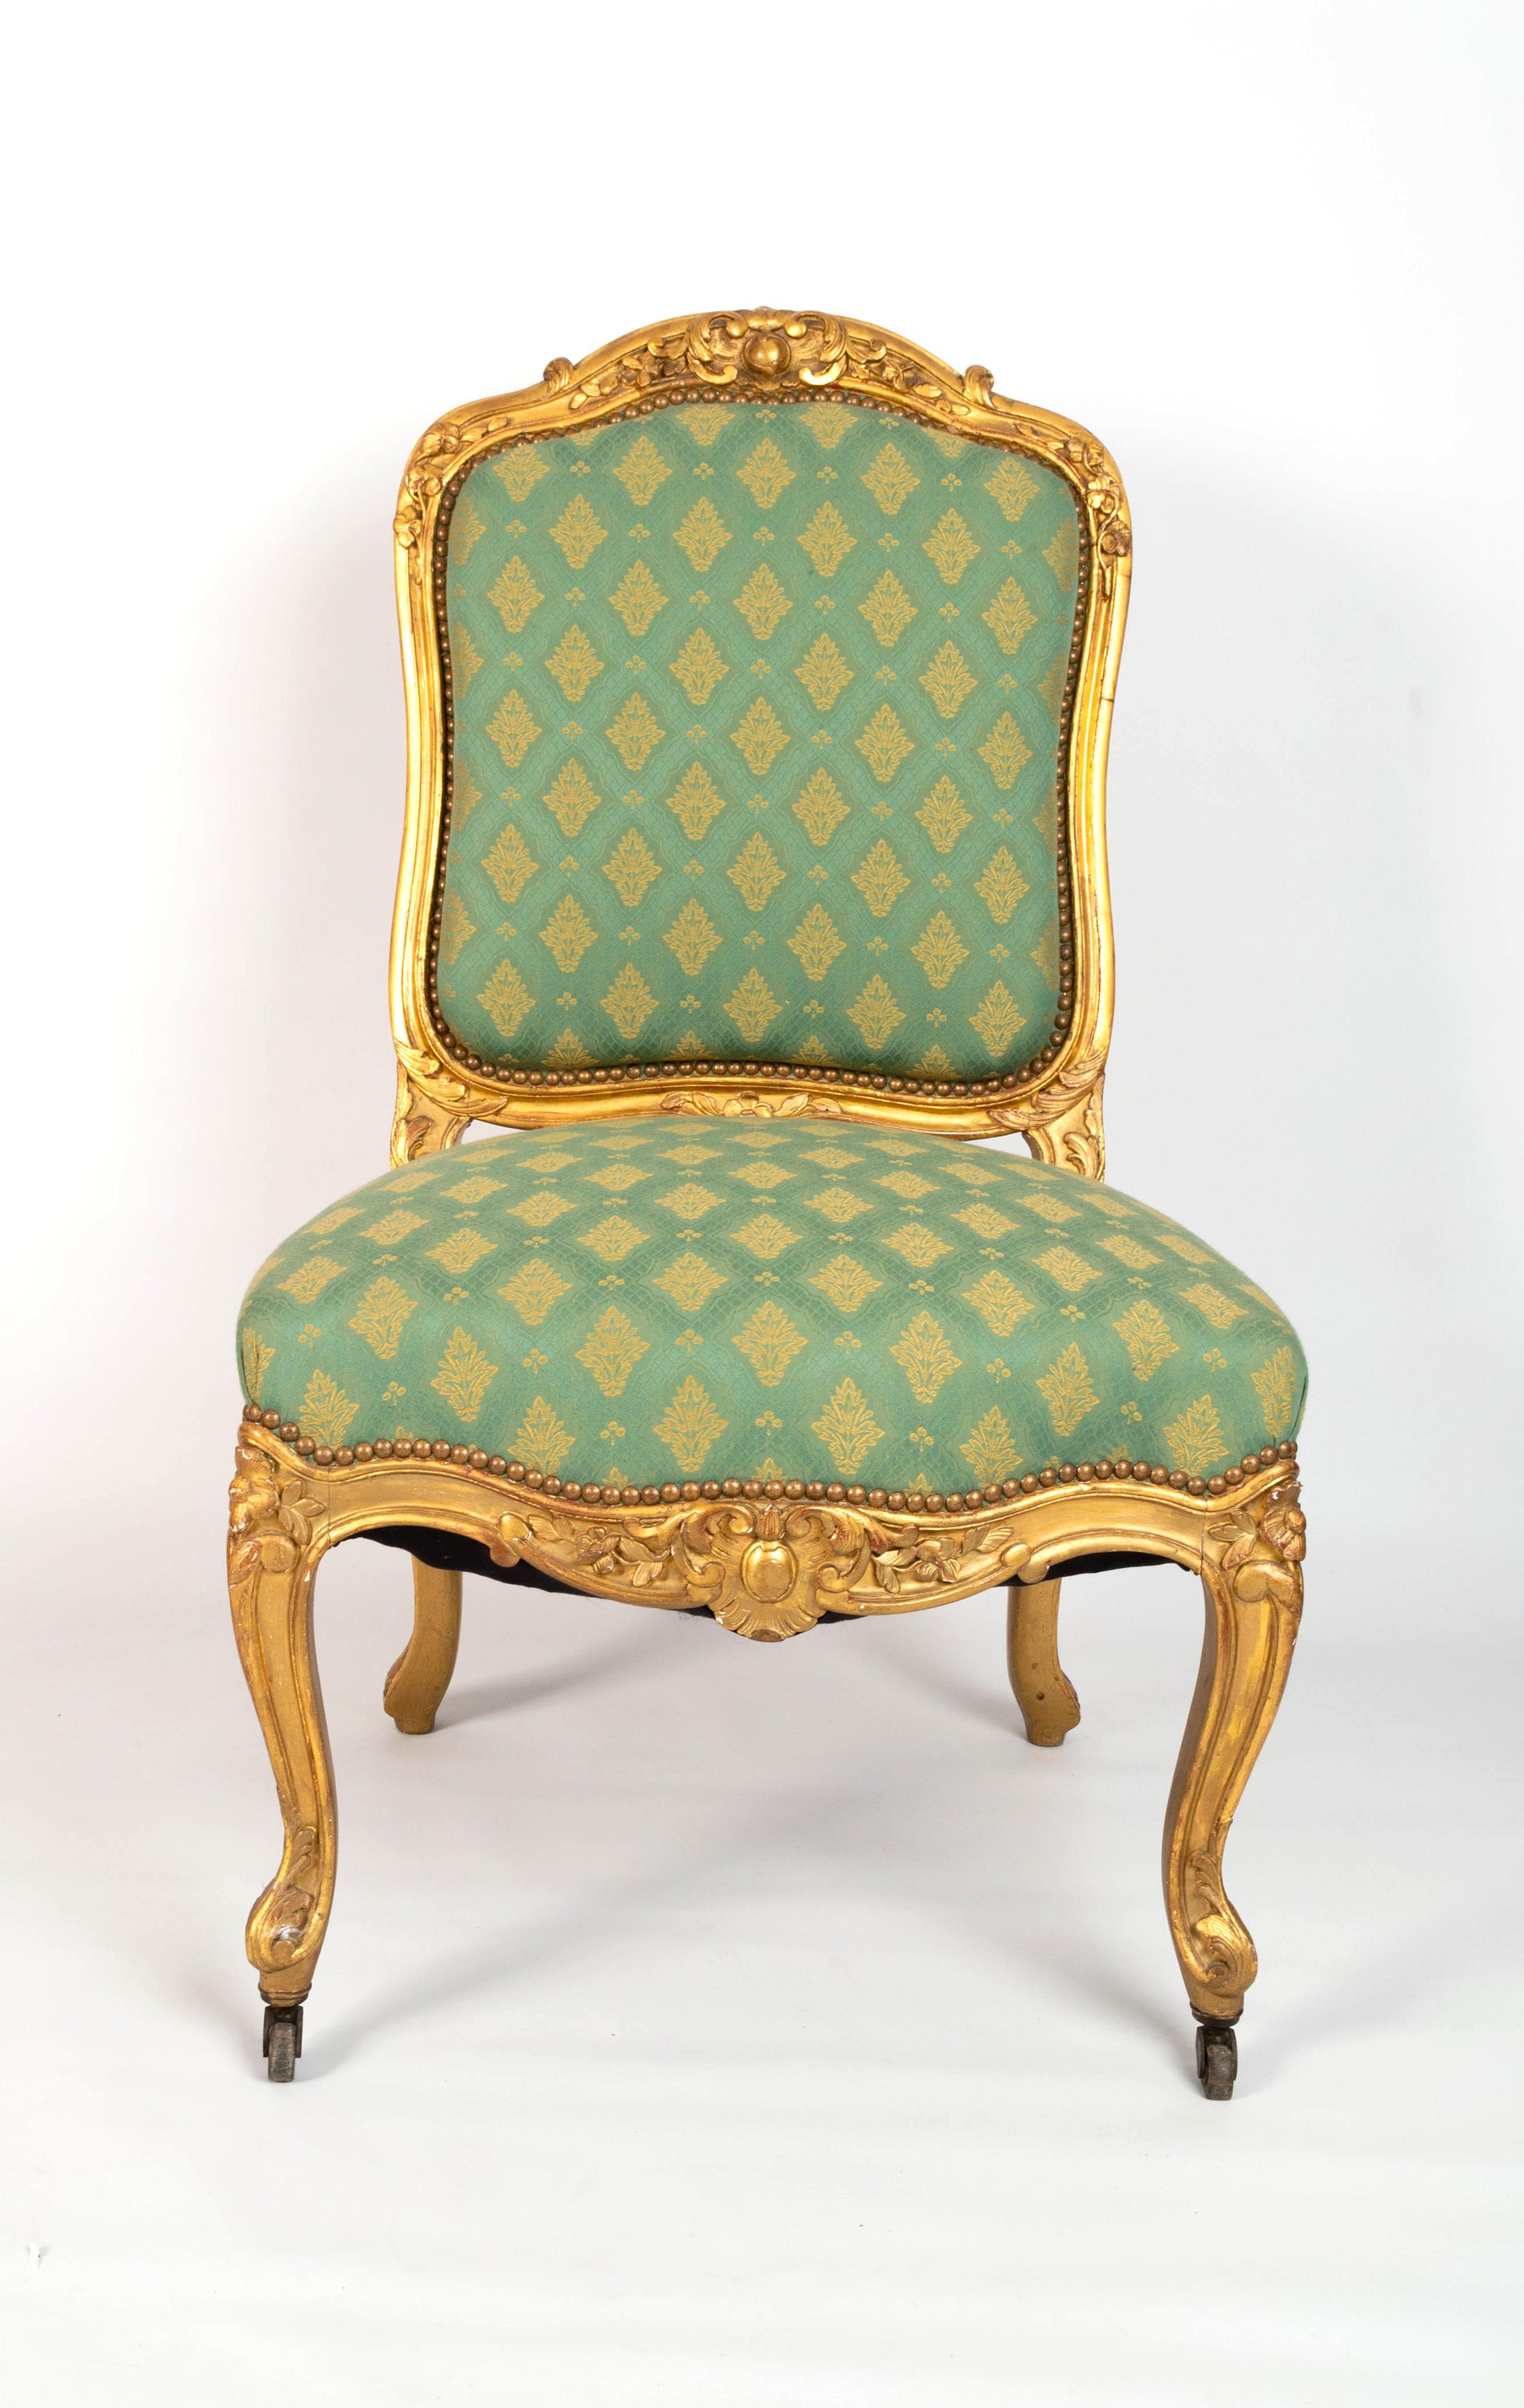 Pair Antique French 19th Century Louis XV Style Giltwood Salon Chairs C.1870 For Sale 5